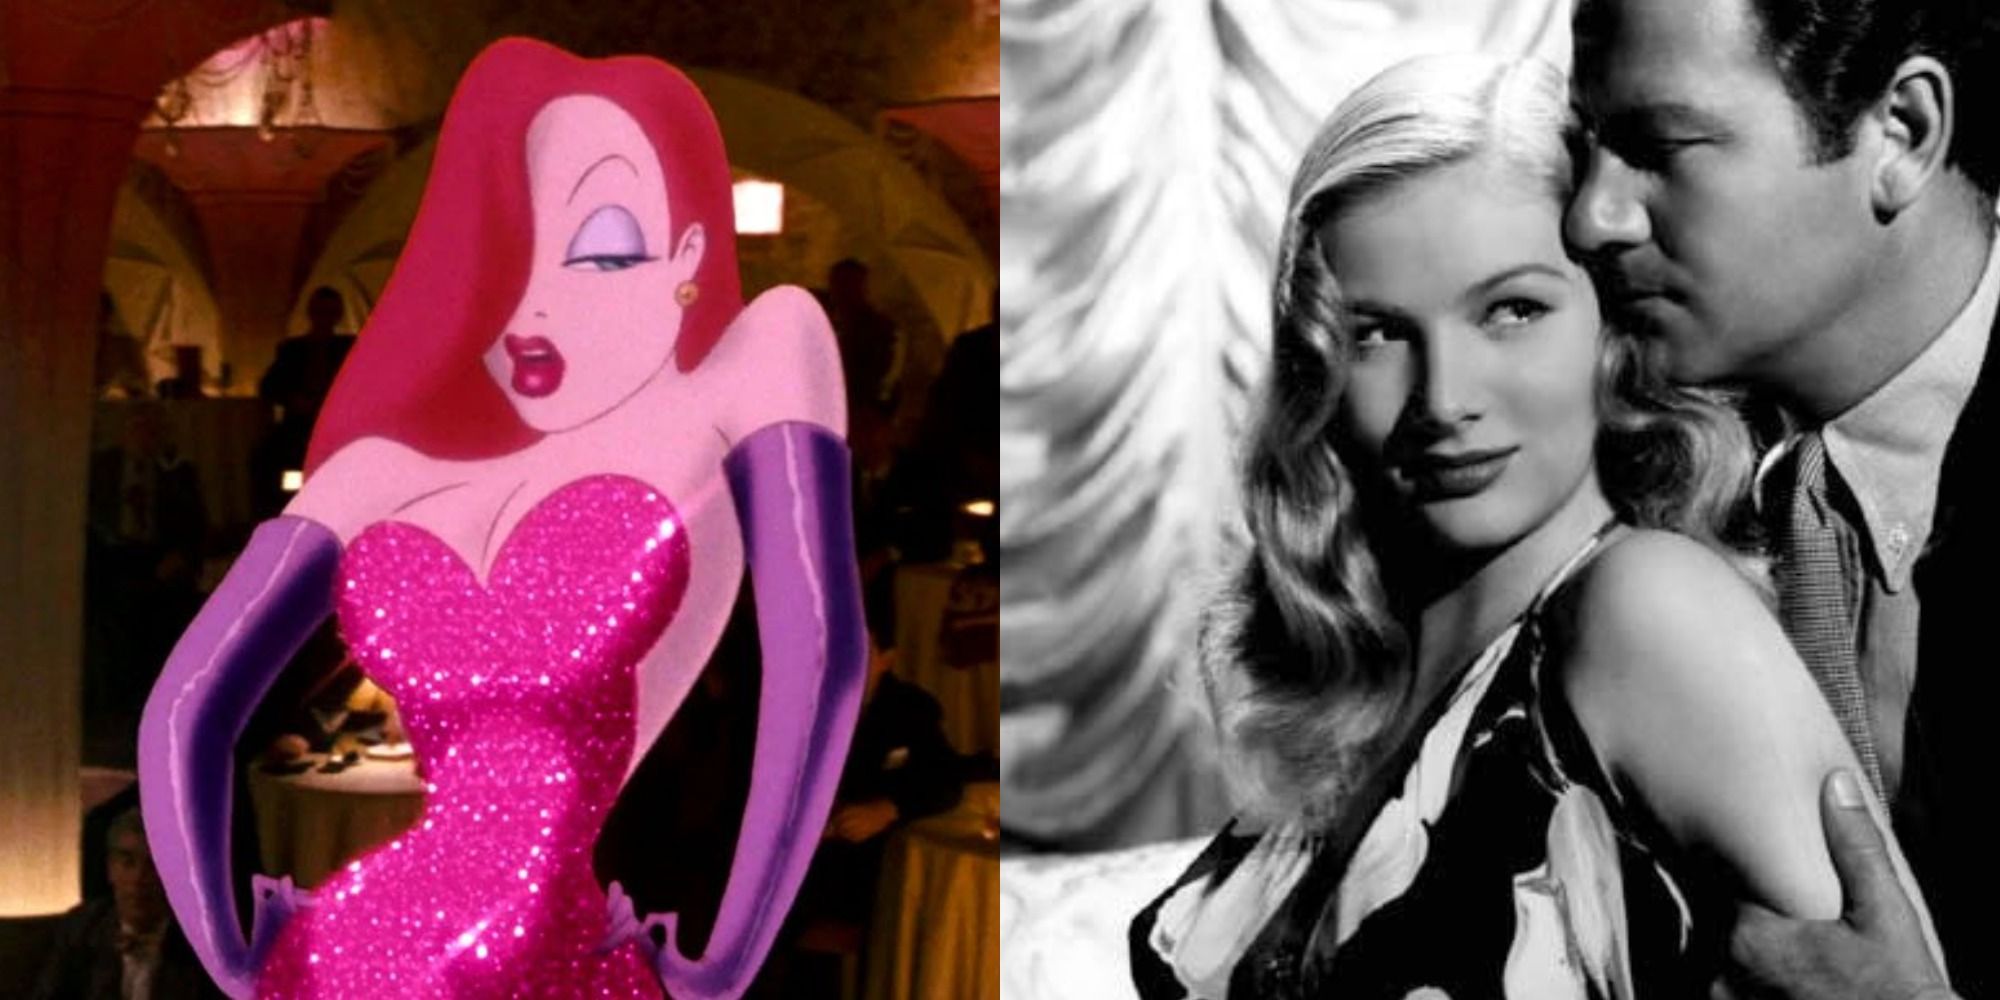 Side by side image of Jessica Rabbit and Veronica Lake